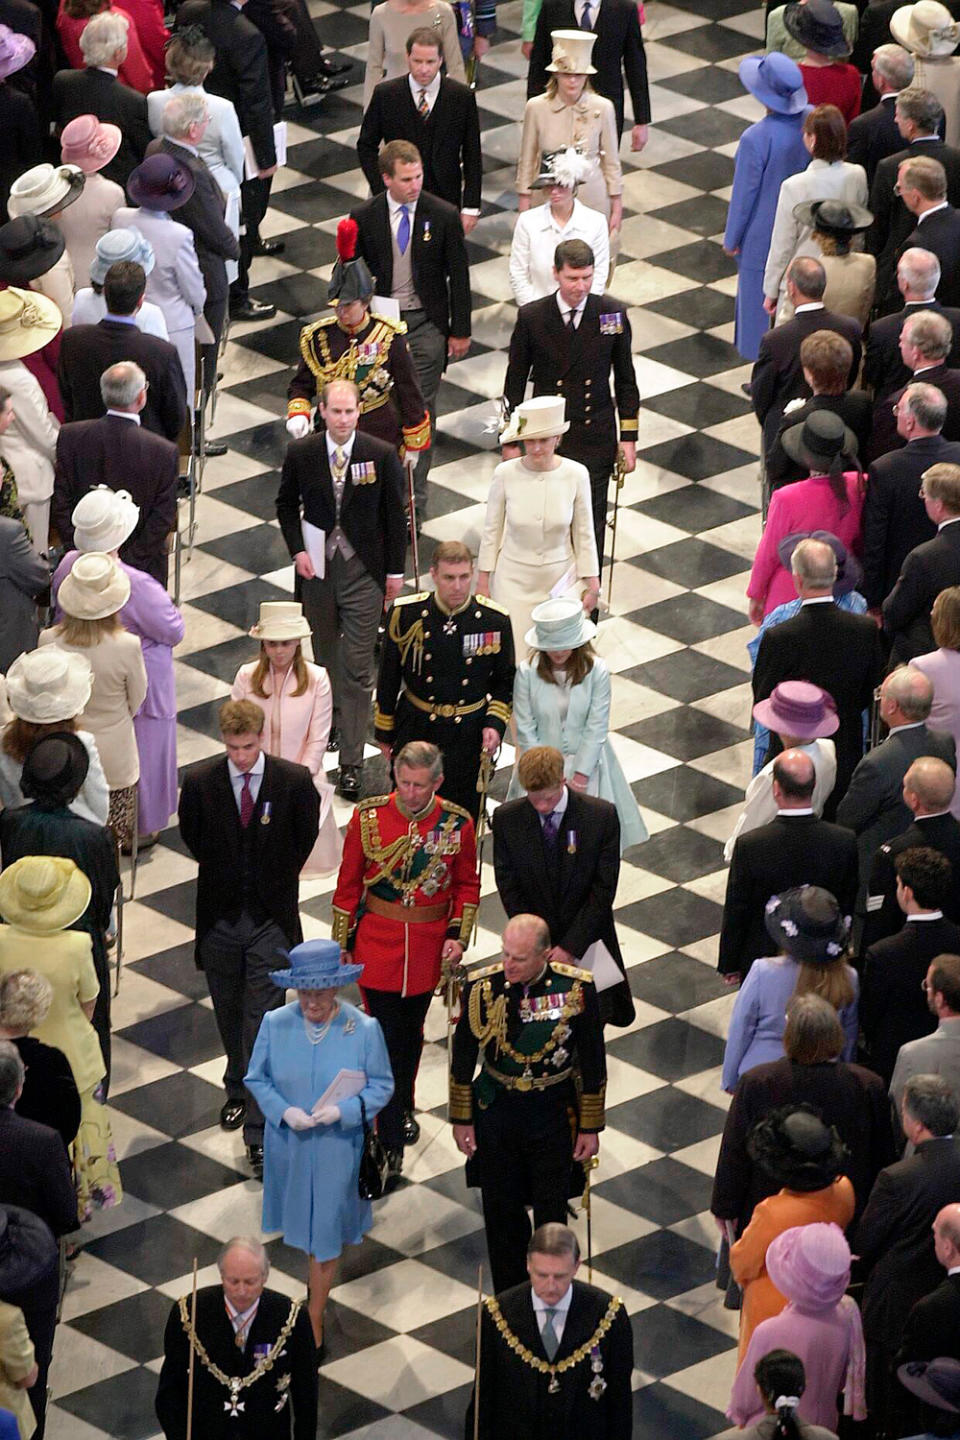 2002: The Royal Family at St. Paul's Cathedral